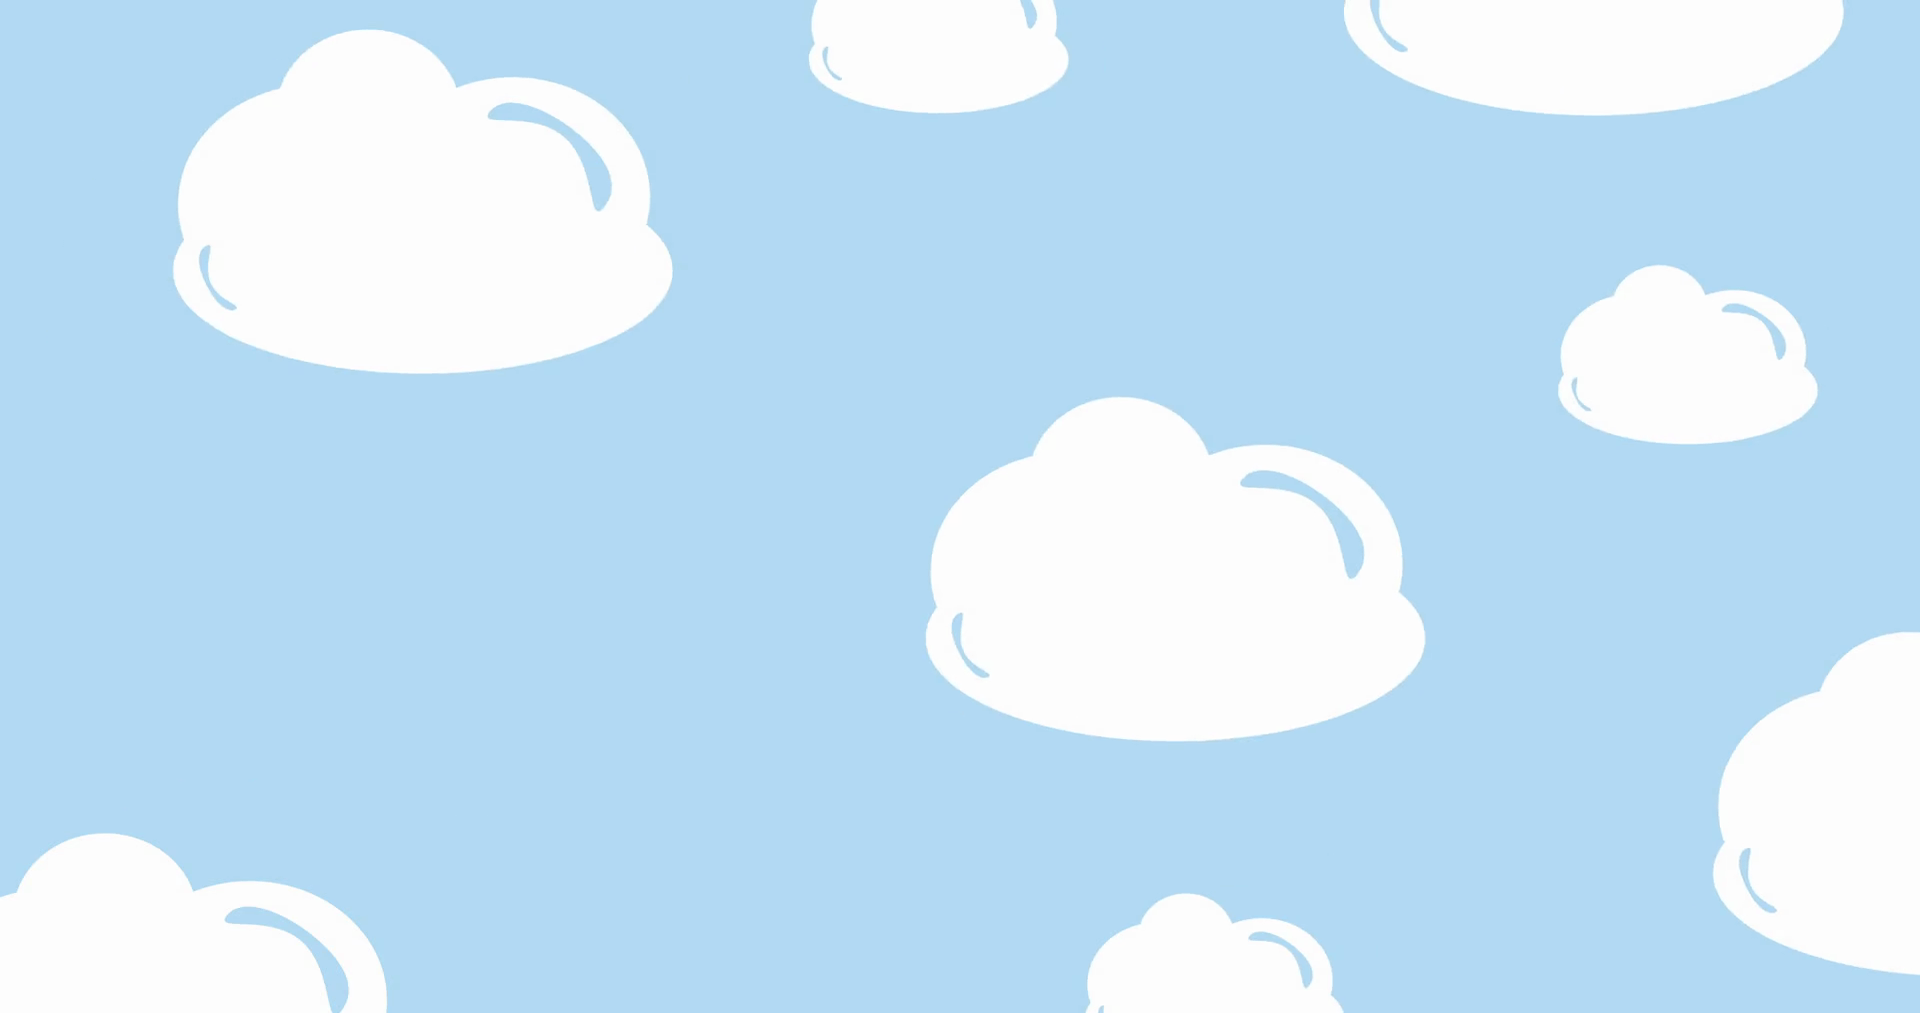 Clouds float across the sky background for web or app design